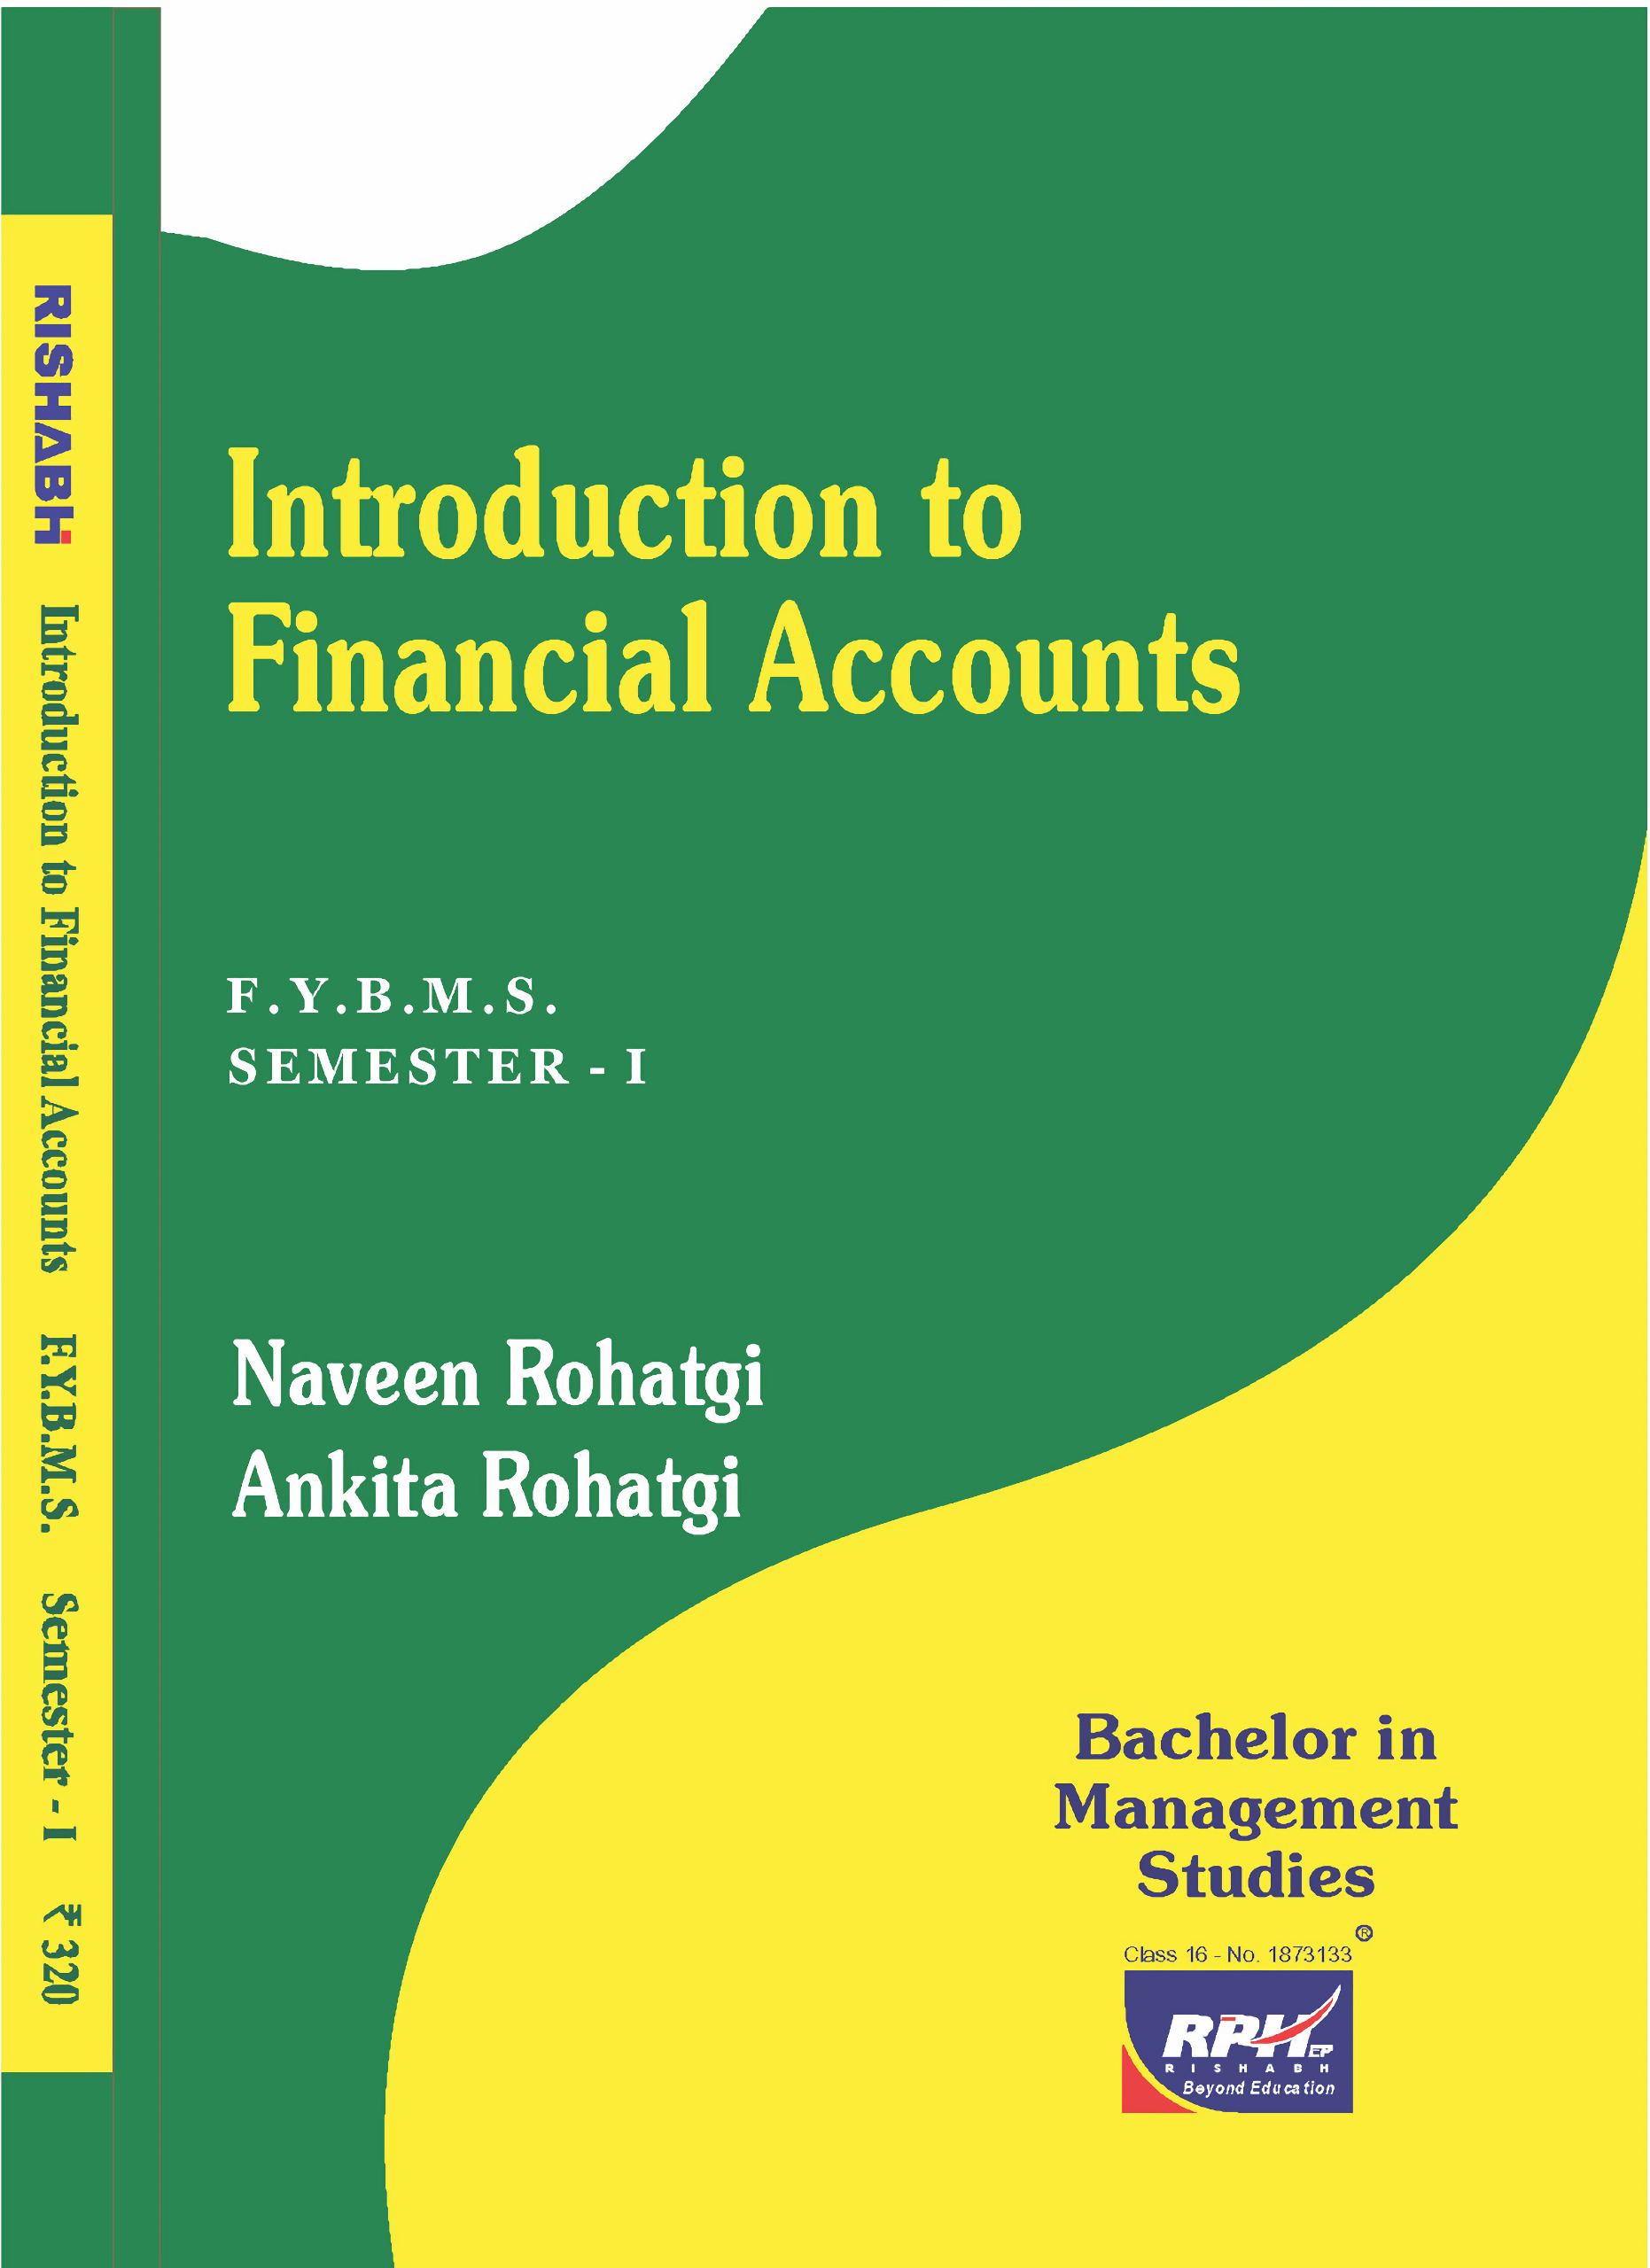 Introduction to Financial Accounts-new